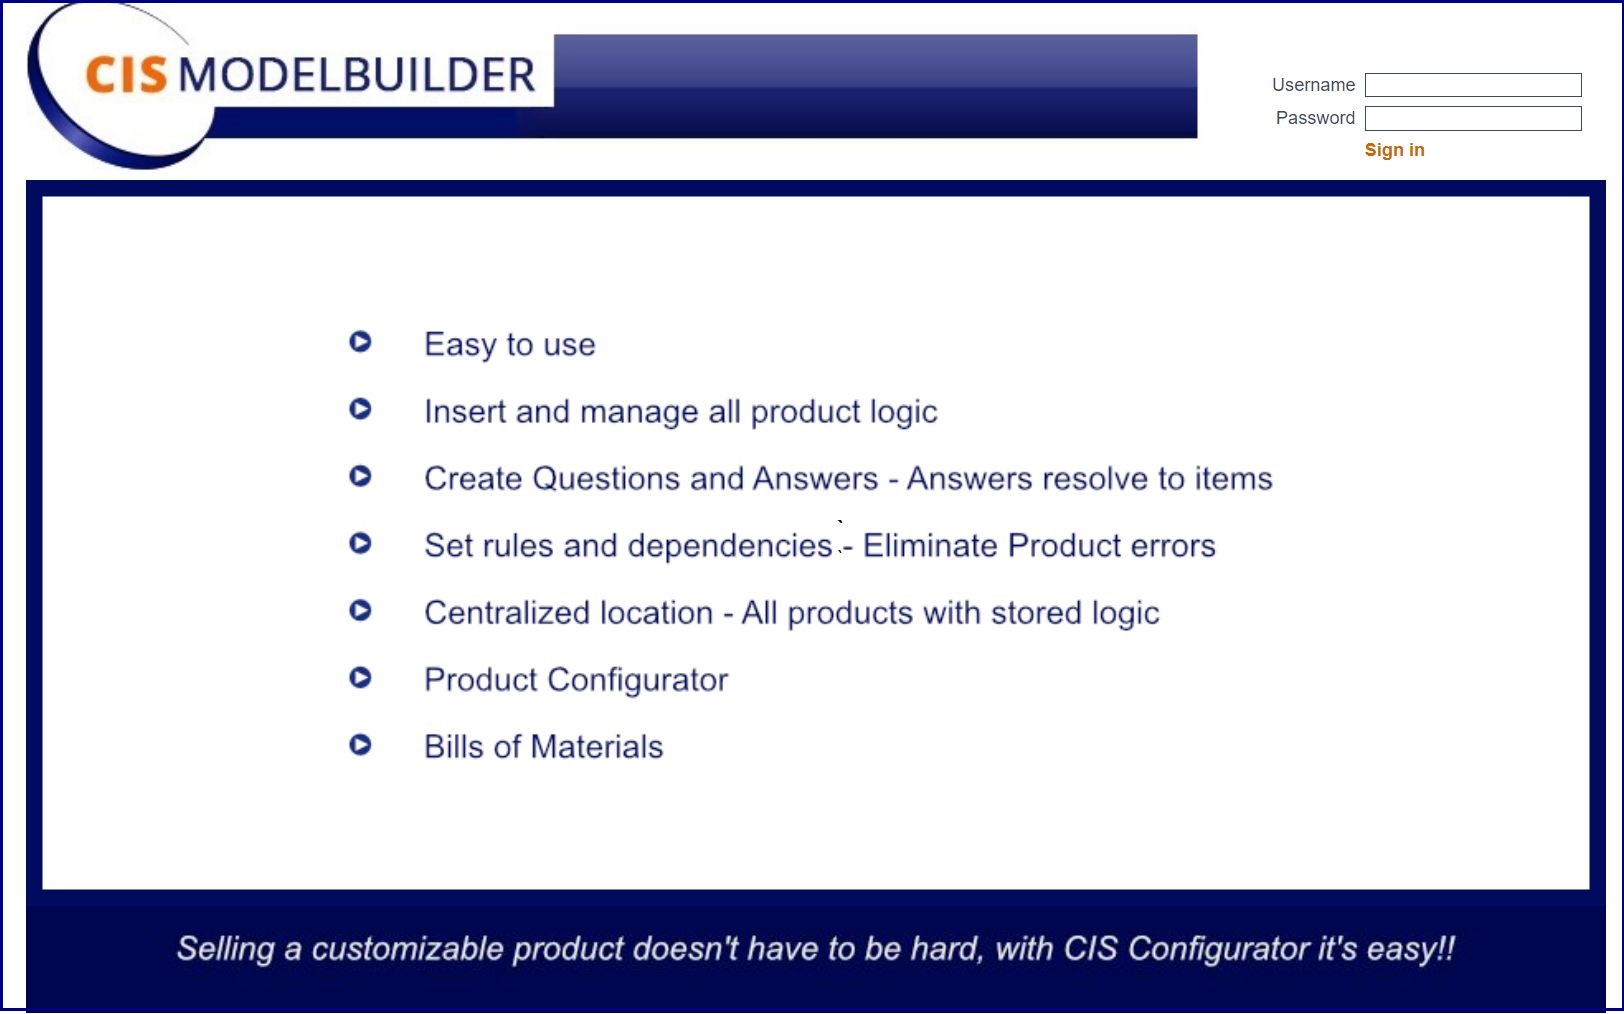 CIS Modelbuilder is the engine that feeds the Configurator and very easy to use, we recommend a total of 16 hours of training, which is carried out remotely. We also give you access to our online media resources to watch and read..